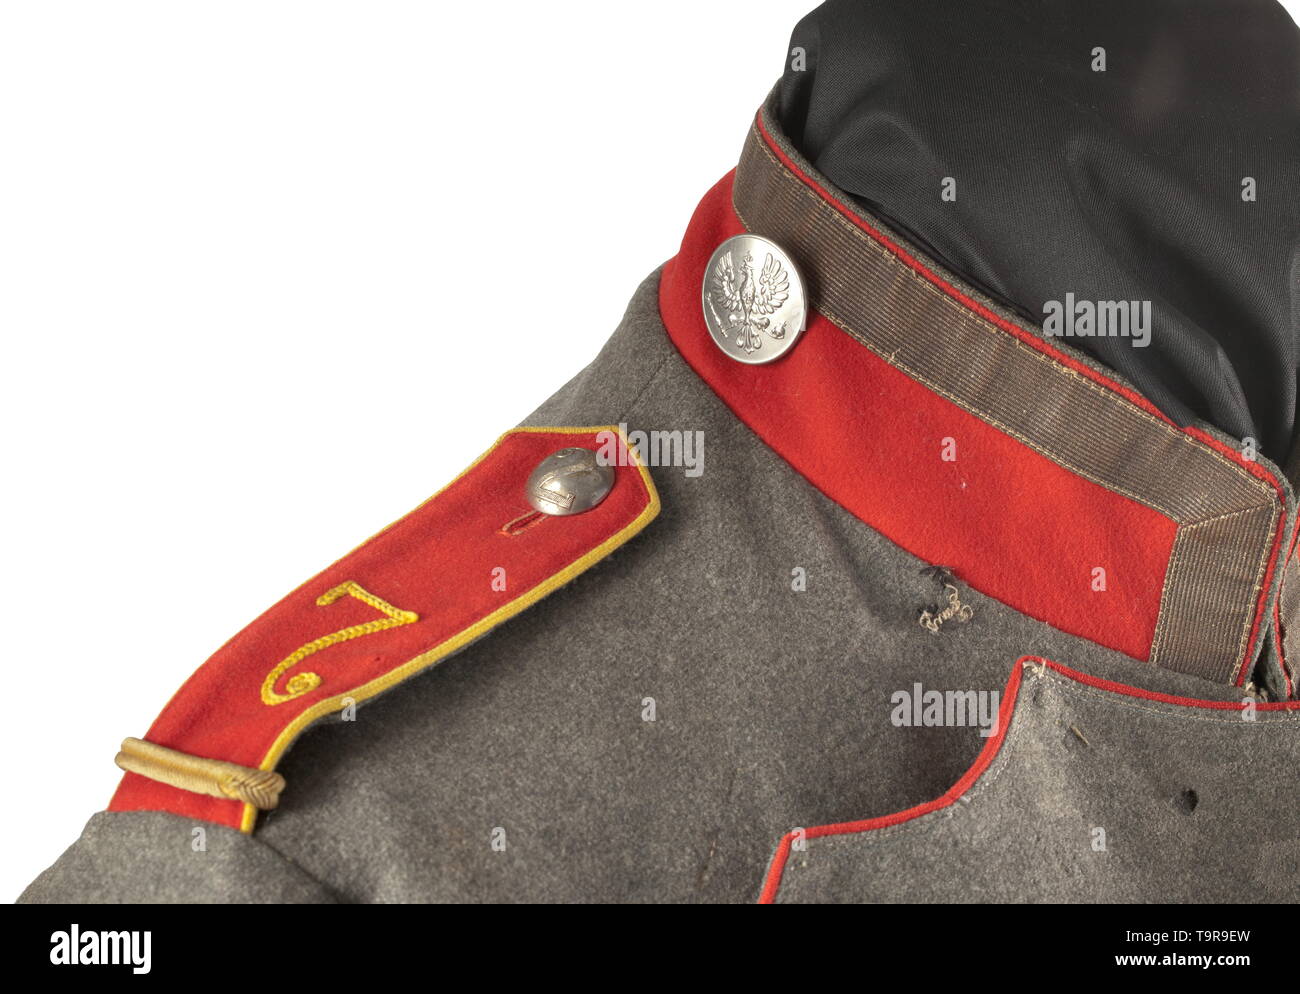 A ulanka M 1908/15 of a sergeant of the Uhlan Regiment No. 7 Field-grey ulanka made of cotton cloth in good quality (depot piece), ponceau red piping, stand-up collar and Polish cuffs. Both the rank distinction buttons on the collar and the remaining white buttons made of nickel. Sewn-on shoulder boards, number '7' in crank embroidery, lemon-yellow piping and additional cord for an equestrian class. The right sleeve with three fencing badges, the cuff with loops for an orders clasp. Grey lining with depot stamps and regimental number 'UR 7'. Tuni, Additional-Rights-Clearance-Info-Not-Available Stock Photo